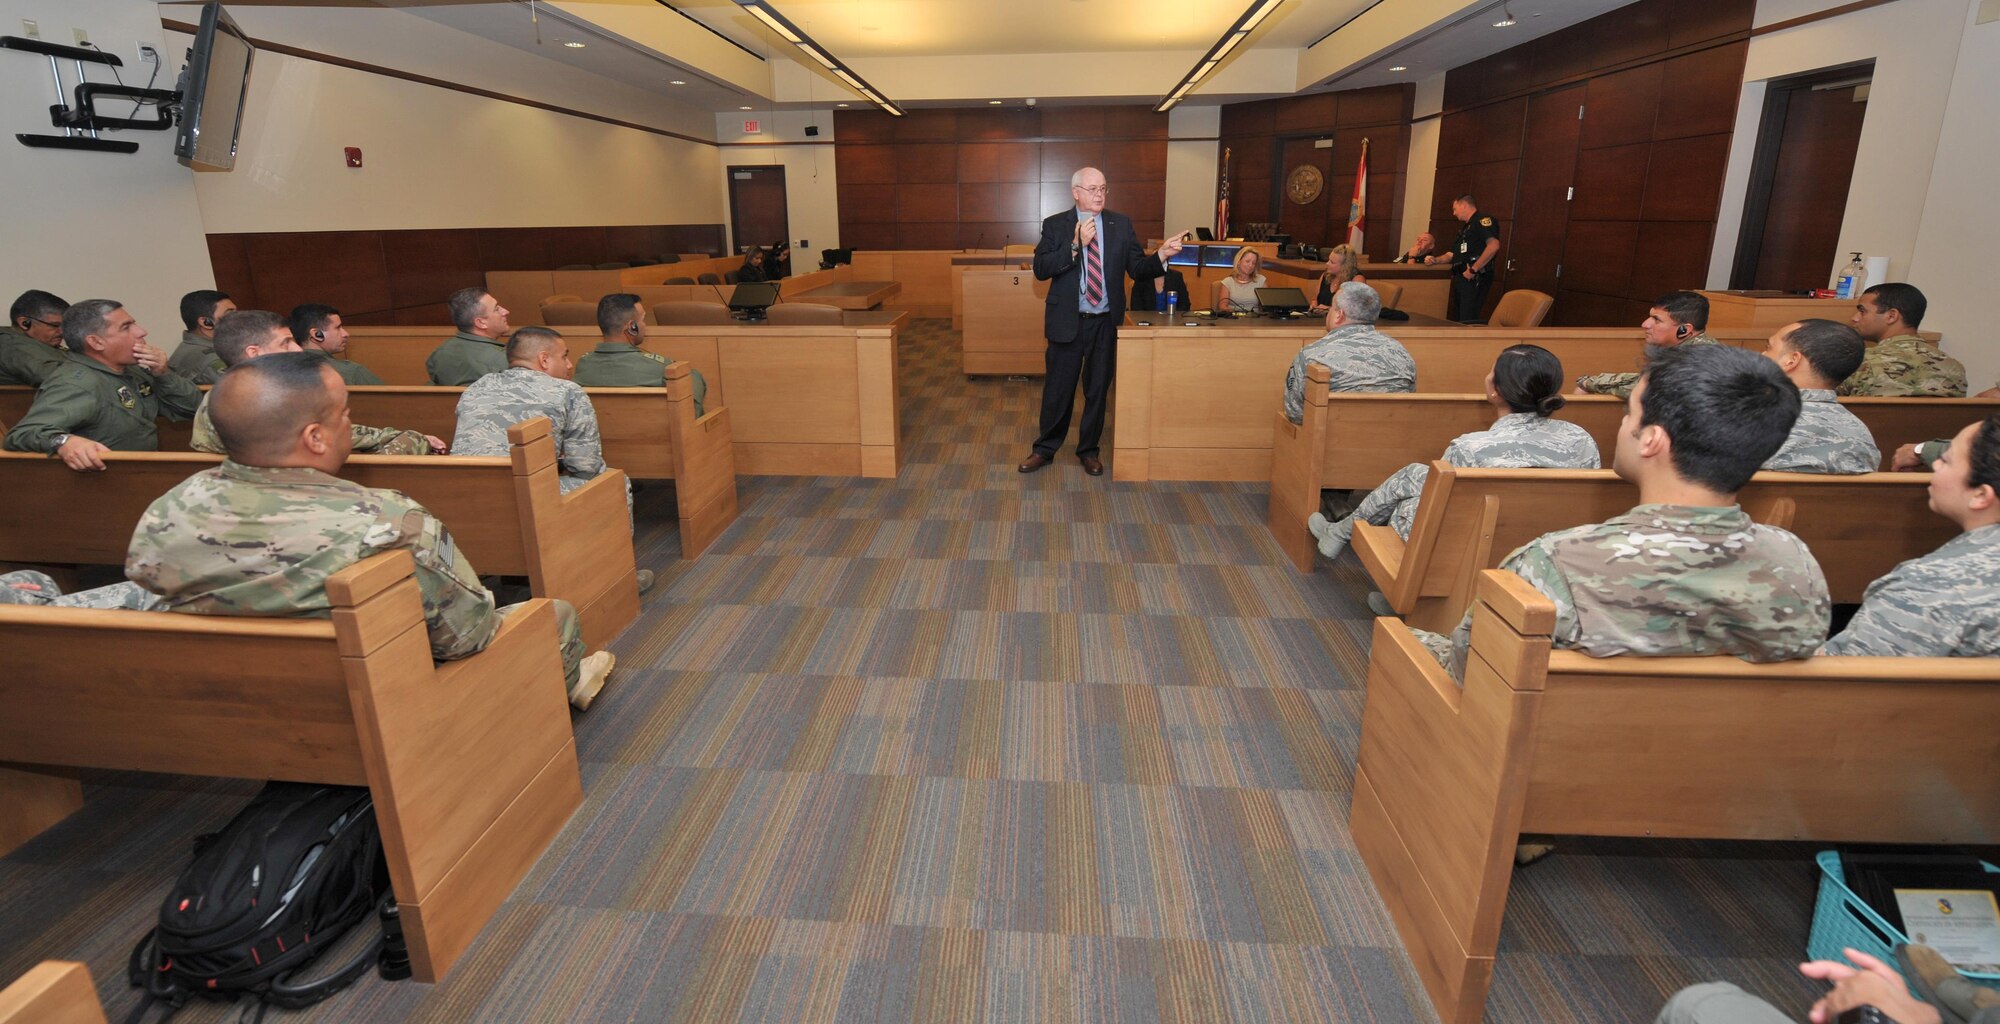 Attendees of the Building Partnership Aviation Capacity Seminar receive briefings from Judge Patt Maney, the county judge for Okaloosa County Court of Florida, at Ft. Walton Beach, Fla.,July 19, 2016. The seminar brought together U.S. and Latin American military represenatives from nine partner nations to learn about each others aviation capabilites and security. 